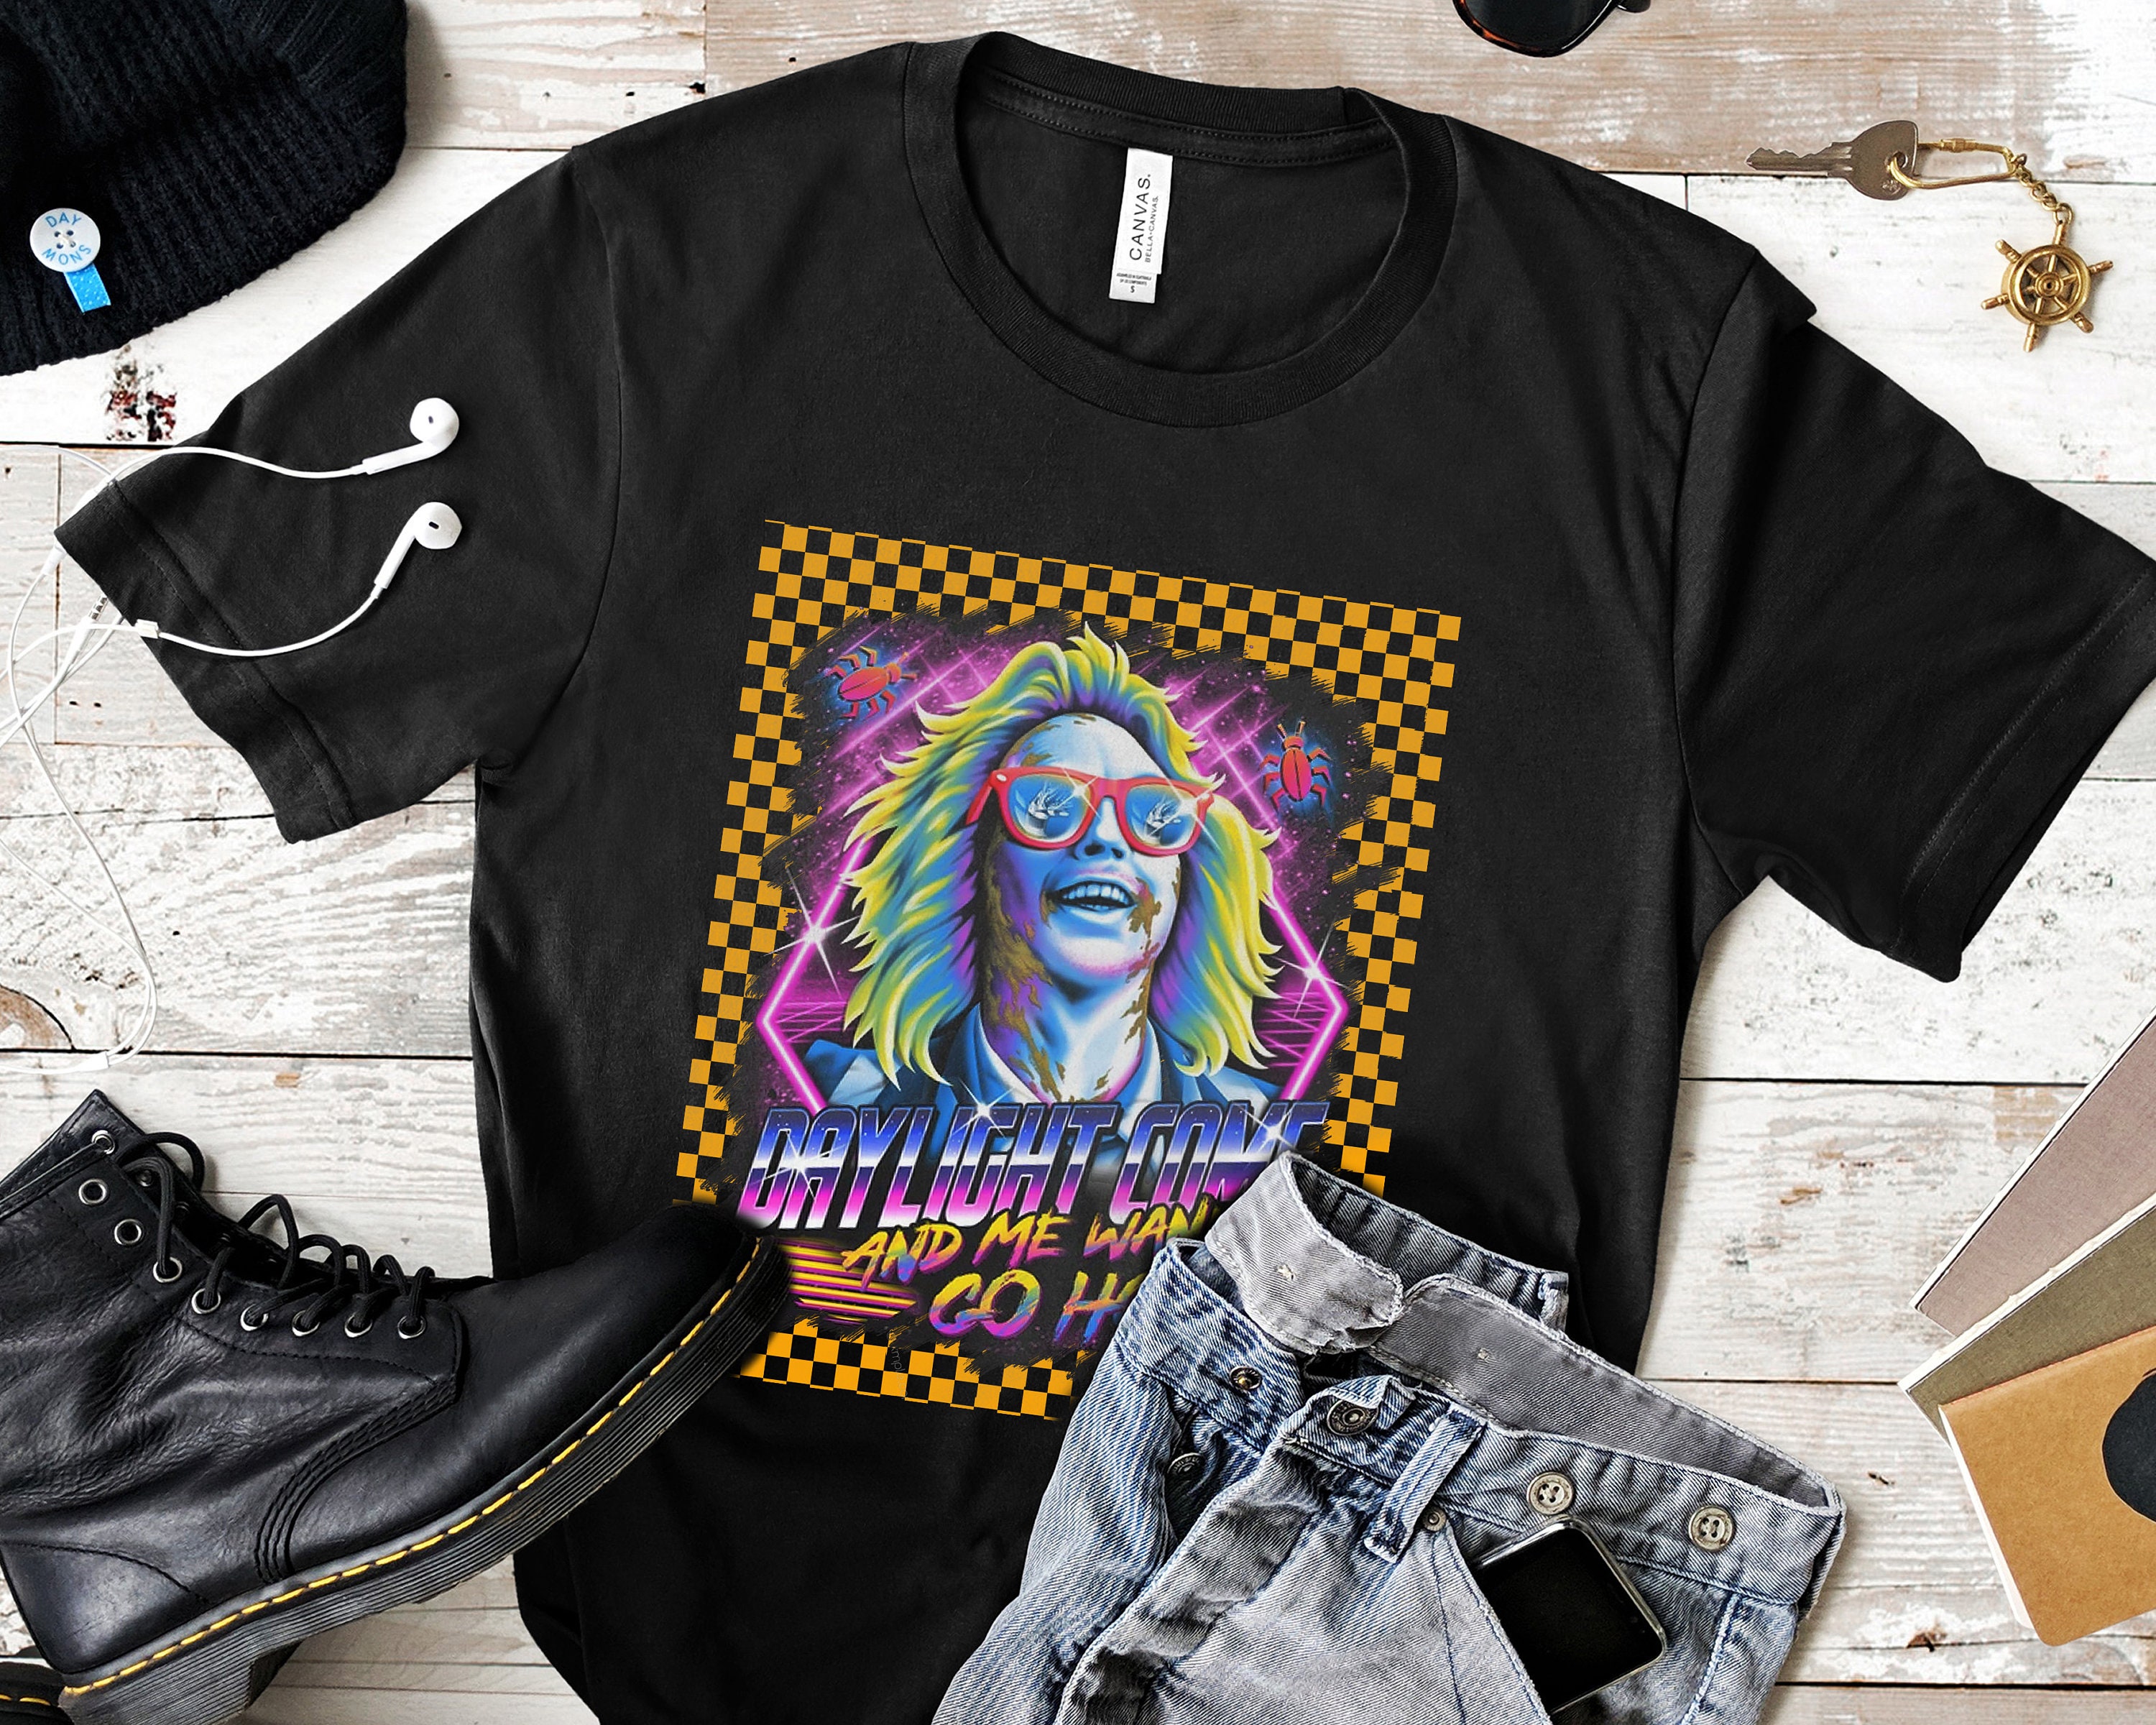 Beetlejuice Daylight Come And Me Wanna Go Home T-Shirt